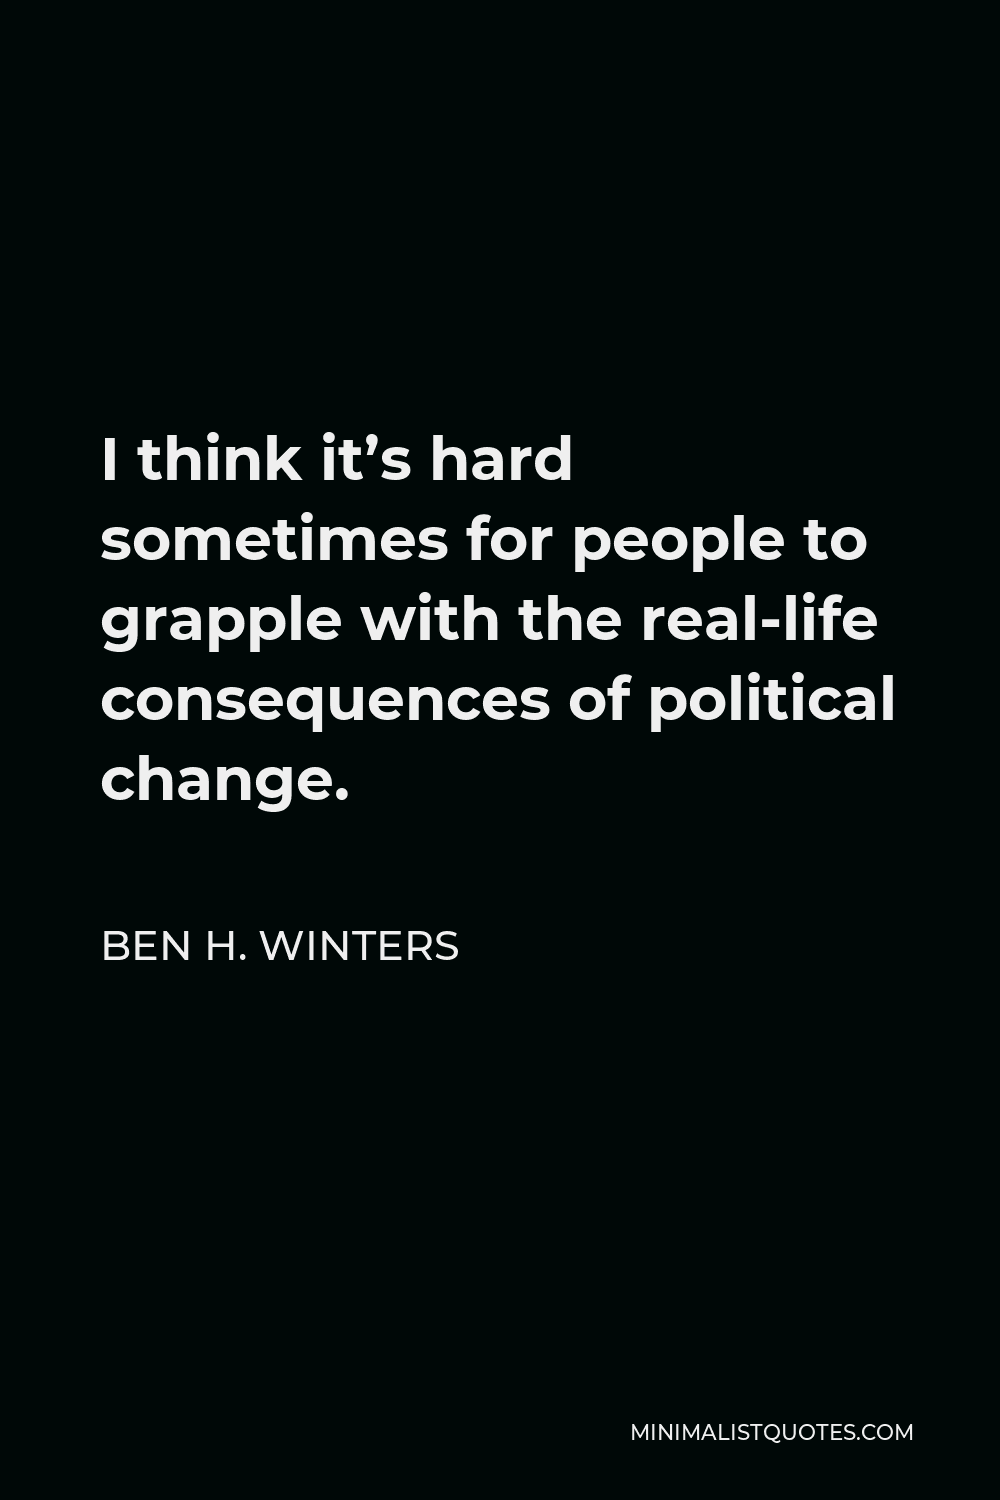 Ben H. Winters Quote - I think it’s hard sometimes for people to grapple with the real-life consequences of political change.